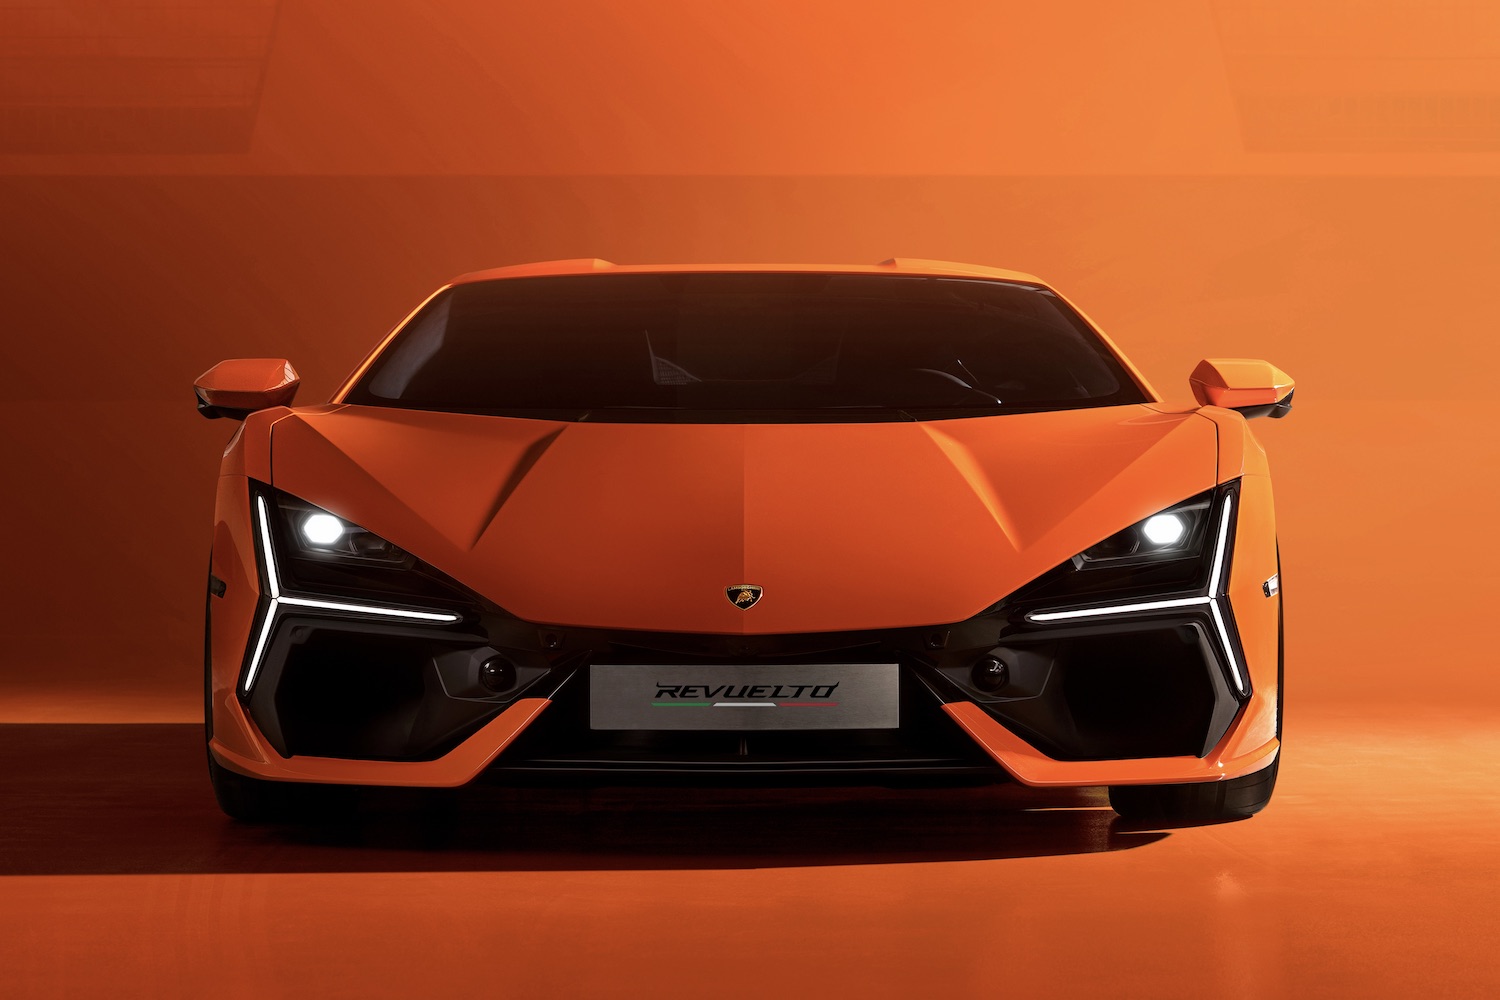 Front end close up of the 2024 Lamborghini Revuelto with an orange background.